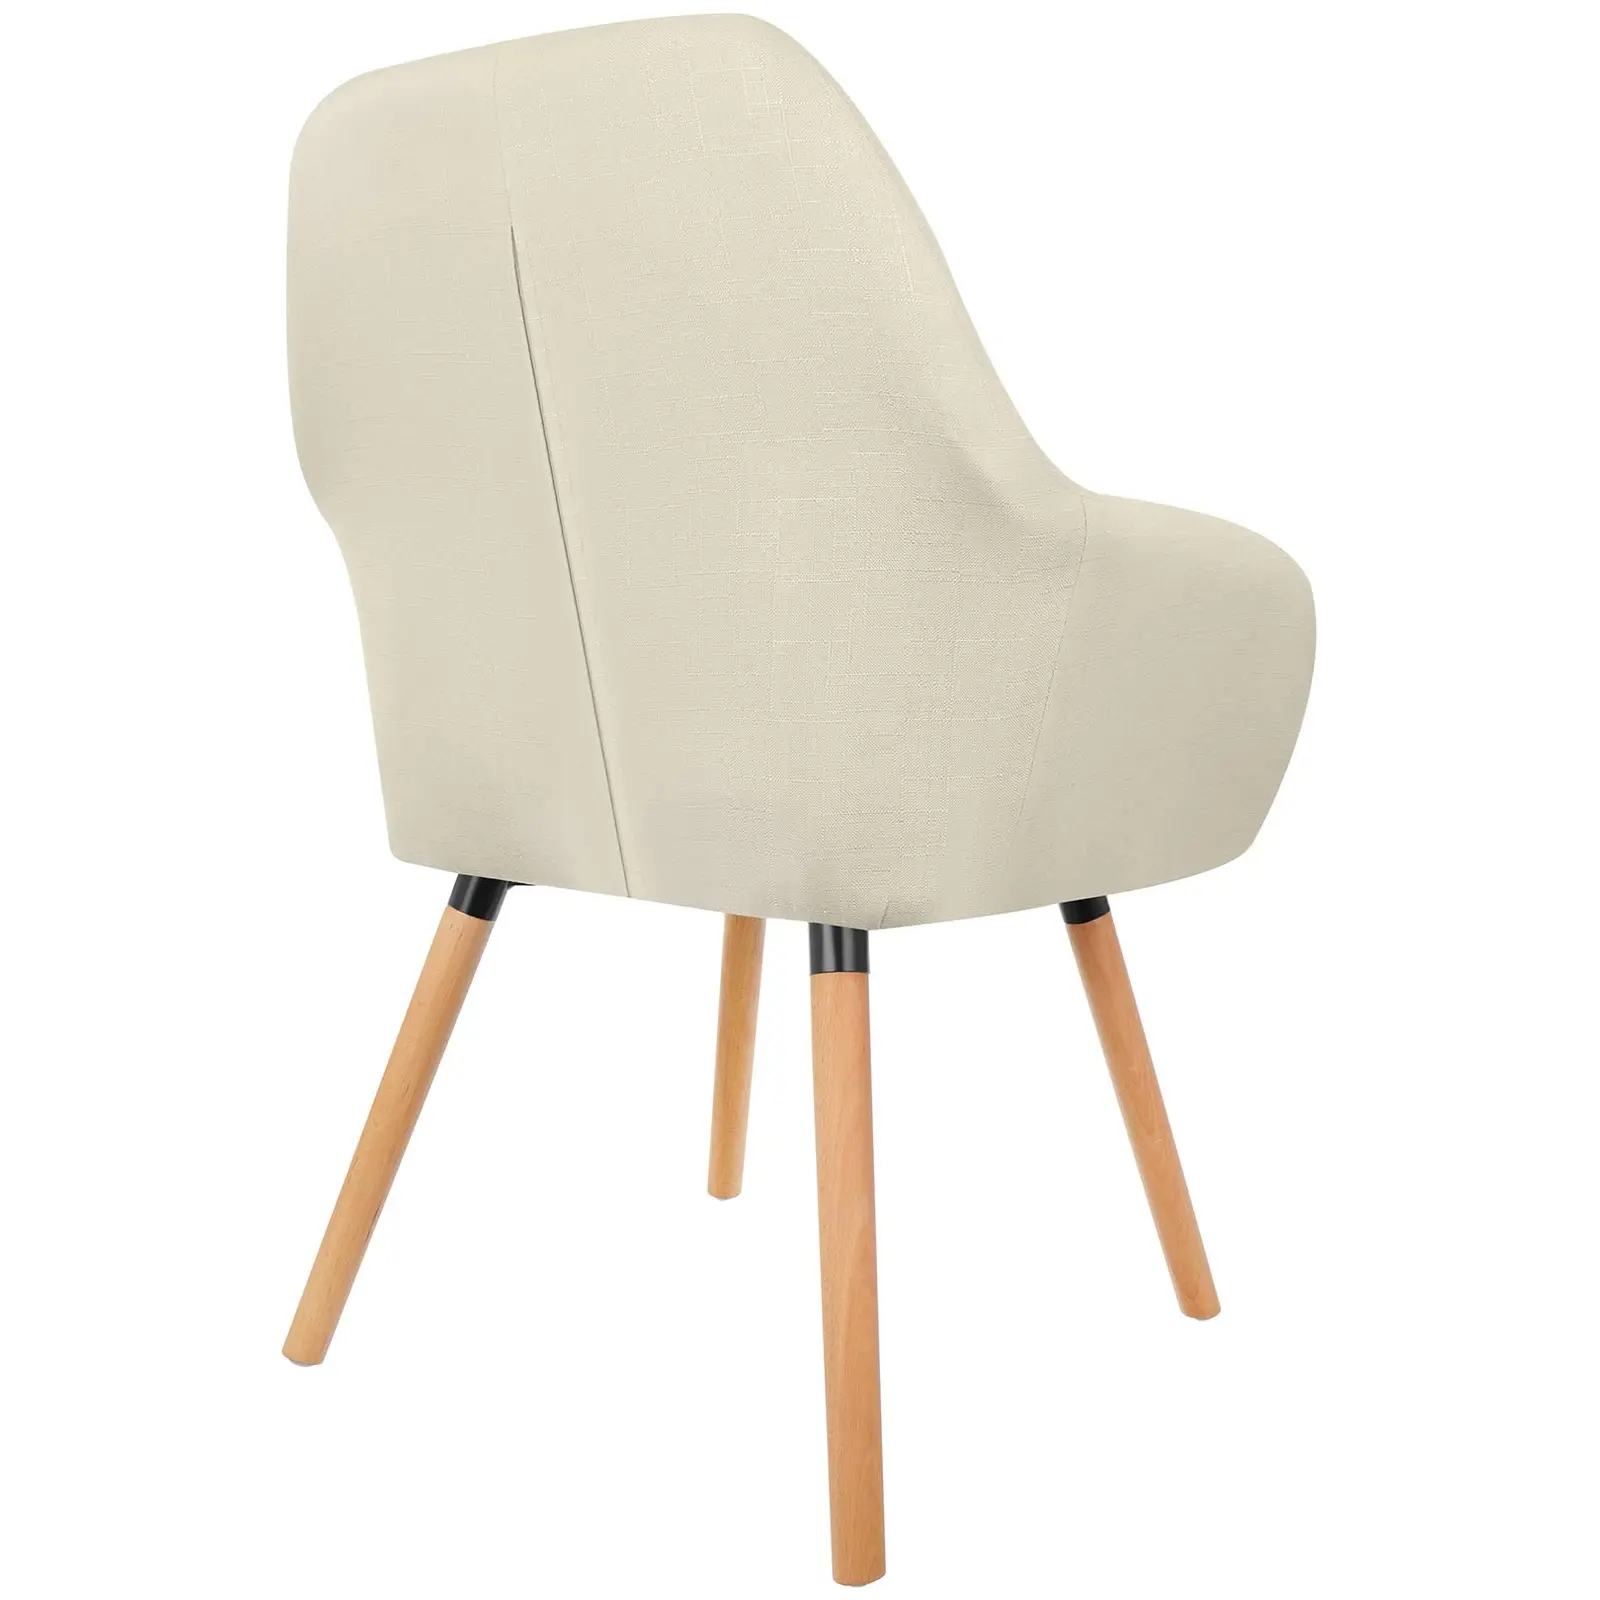 Cushioned Chair - up to 150 kg - seat 45 x 42 cm - beige